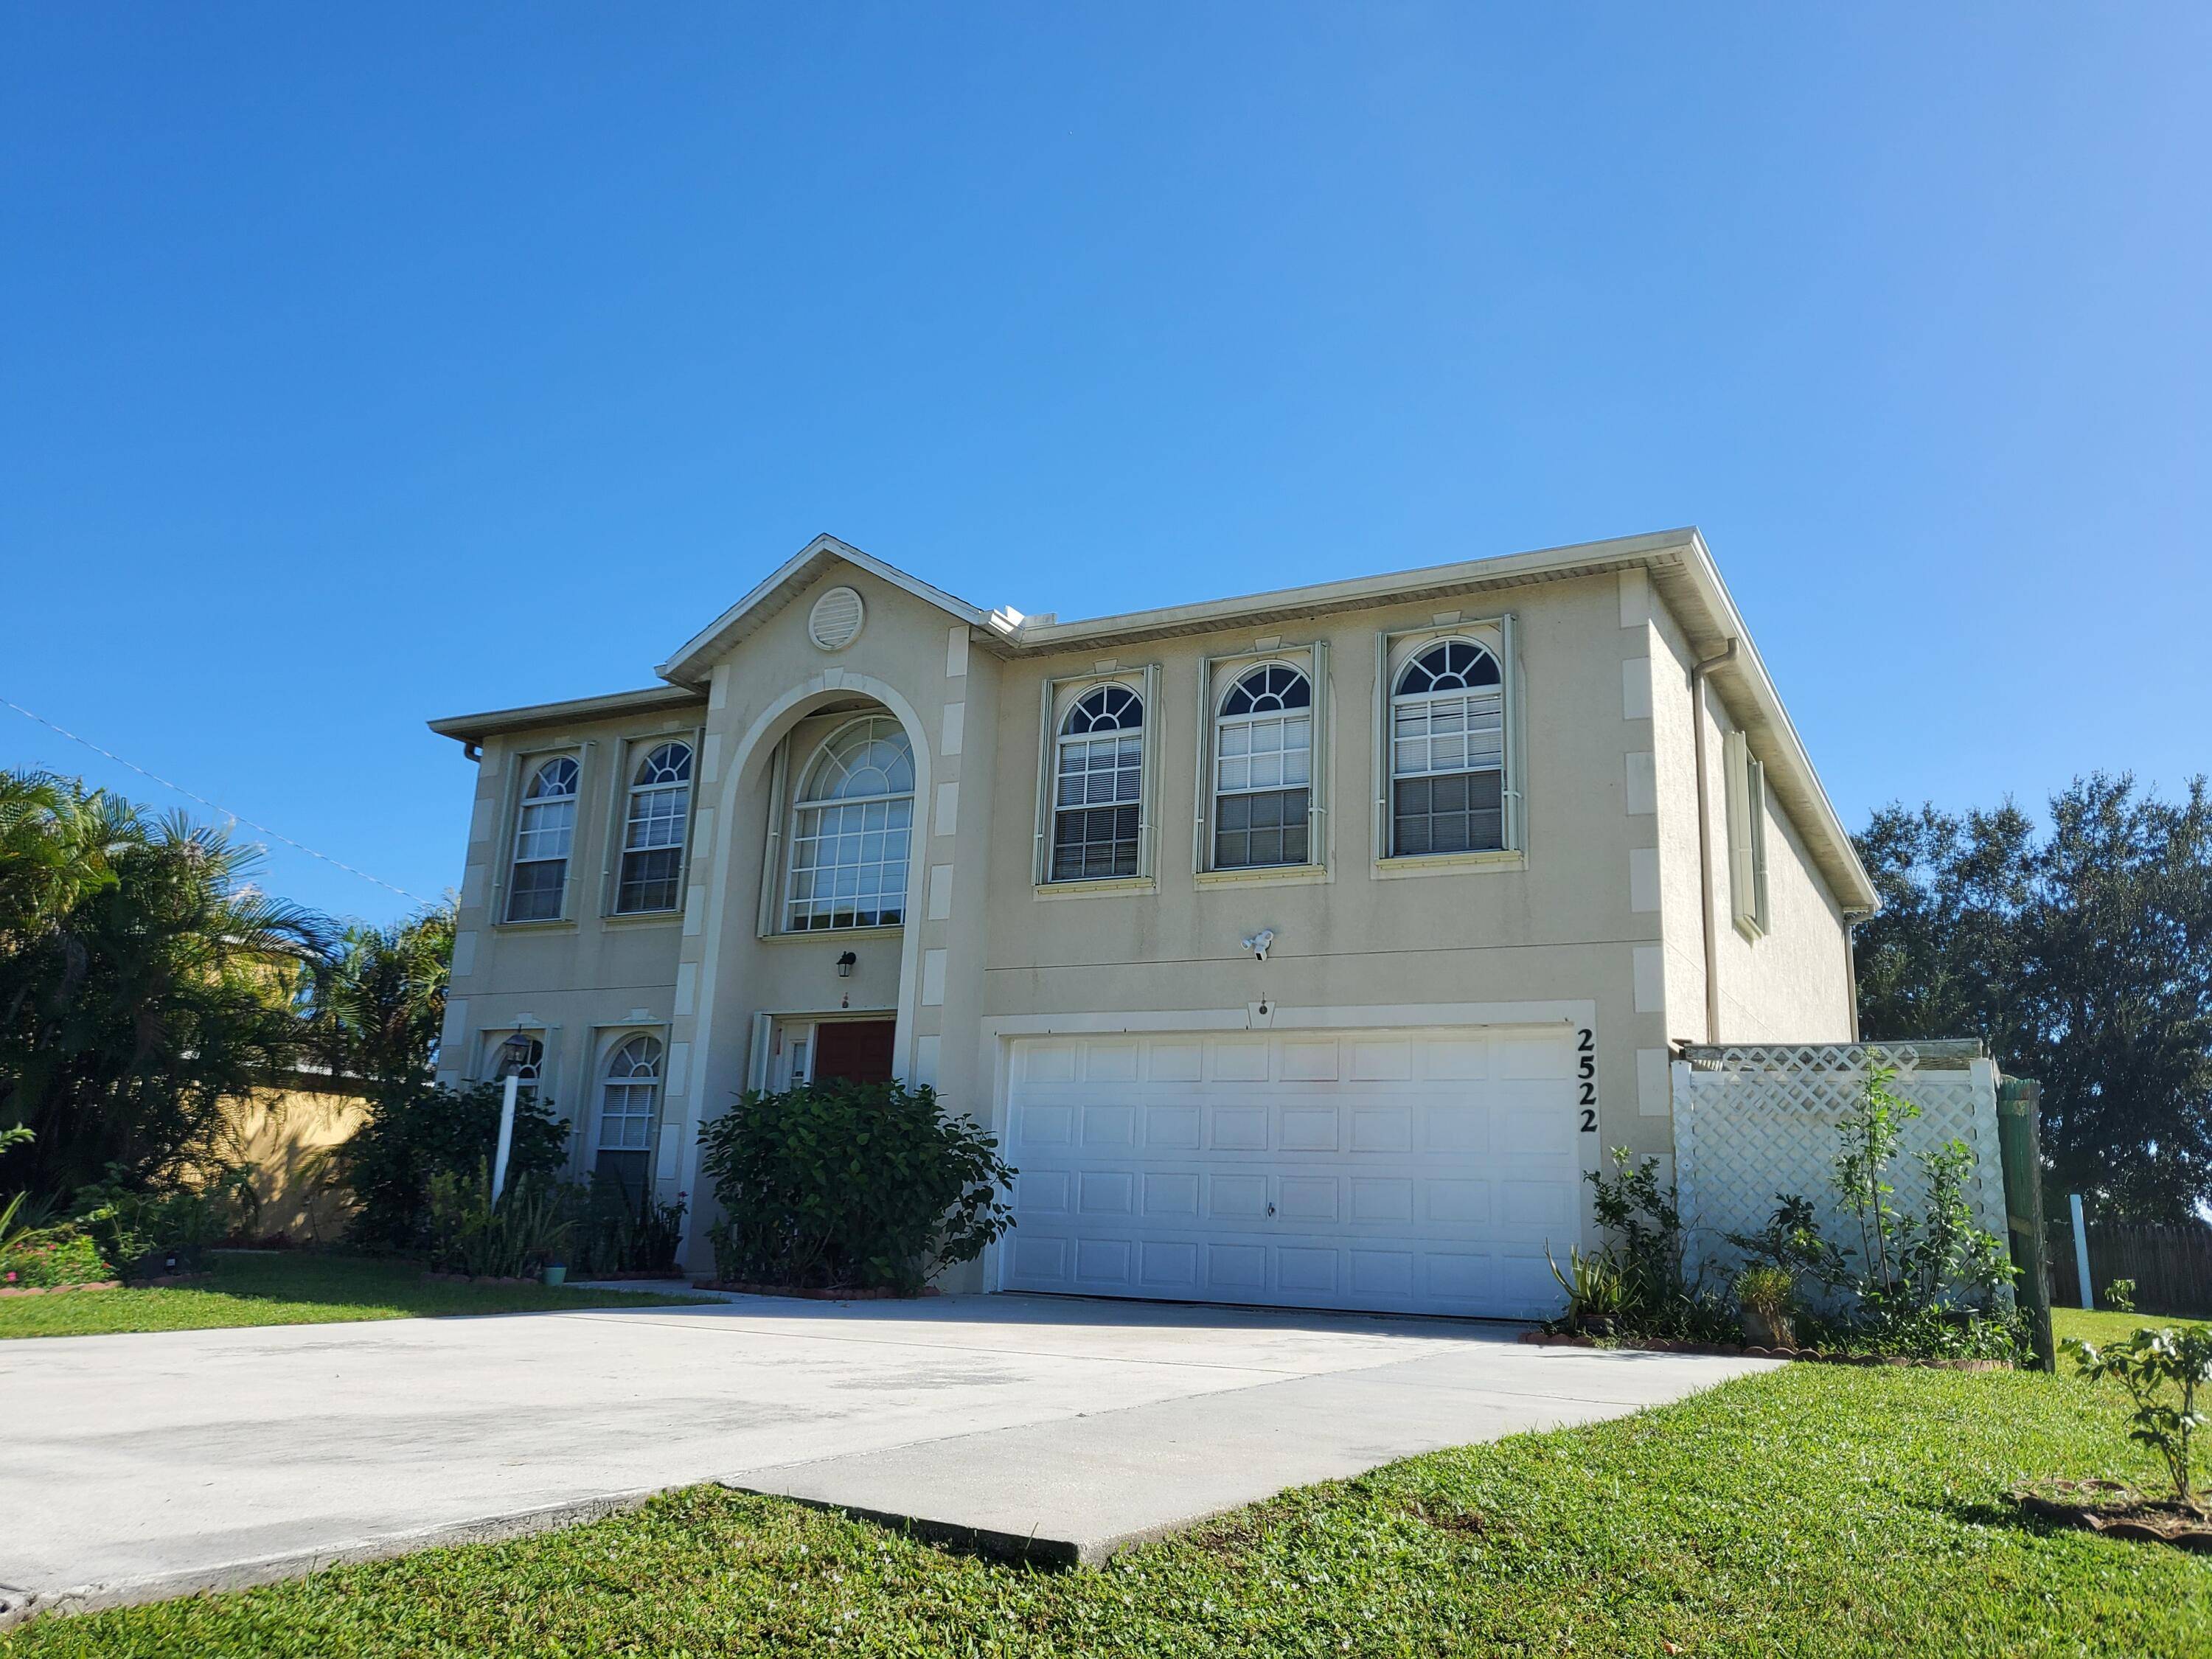 WOW ! ! ! Check out this nice home with 5 bedroom, 3 Bath, 2 story house with 2 car garage located east of us1 in Port Saint Lucie.